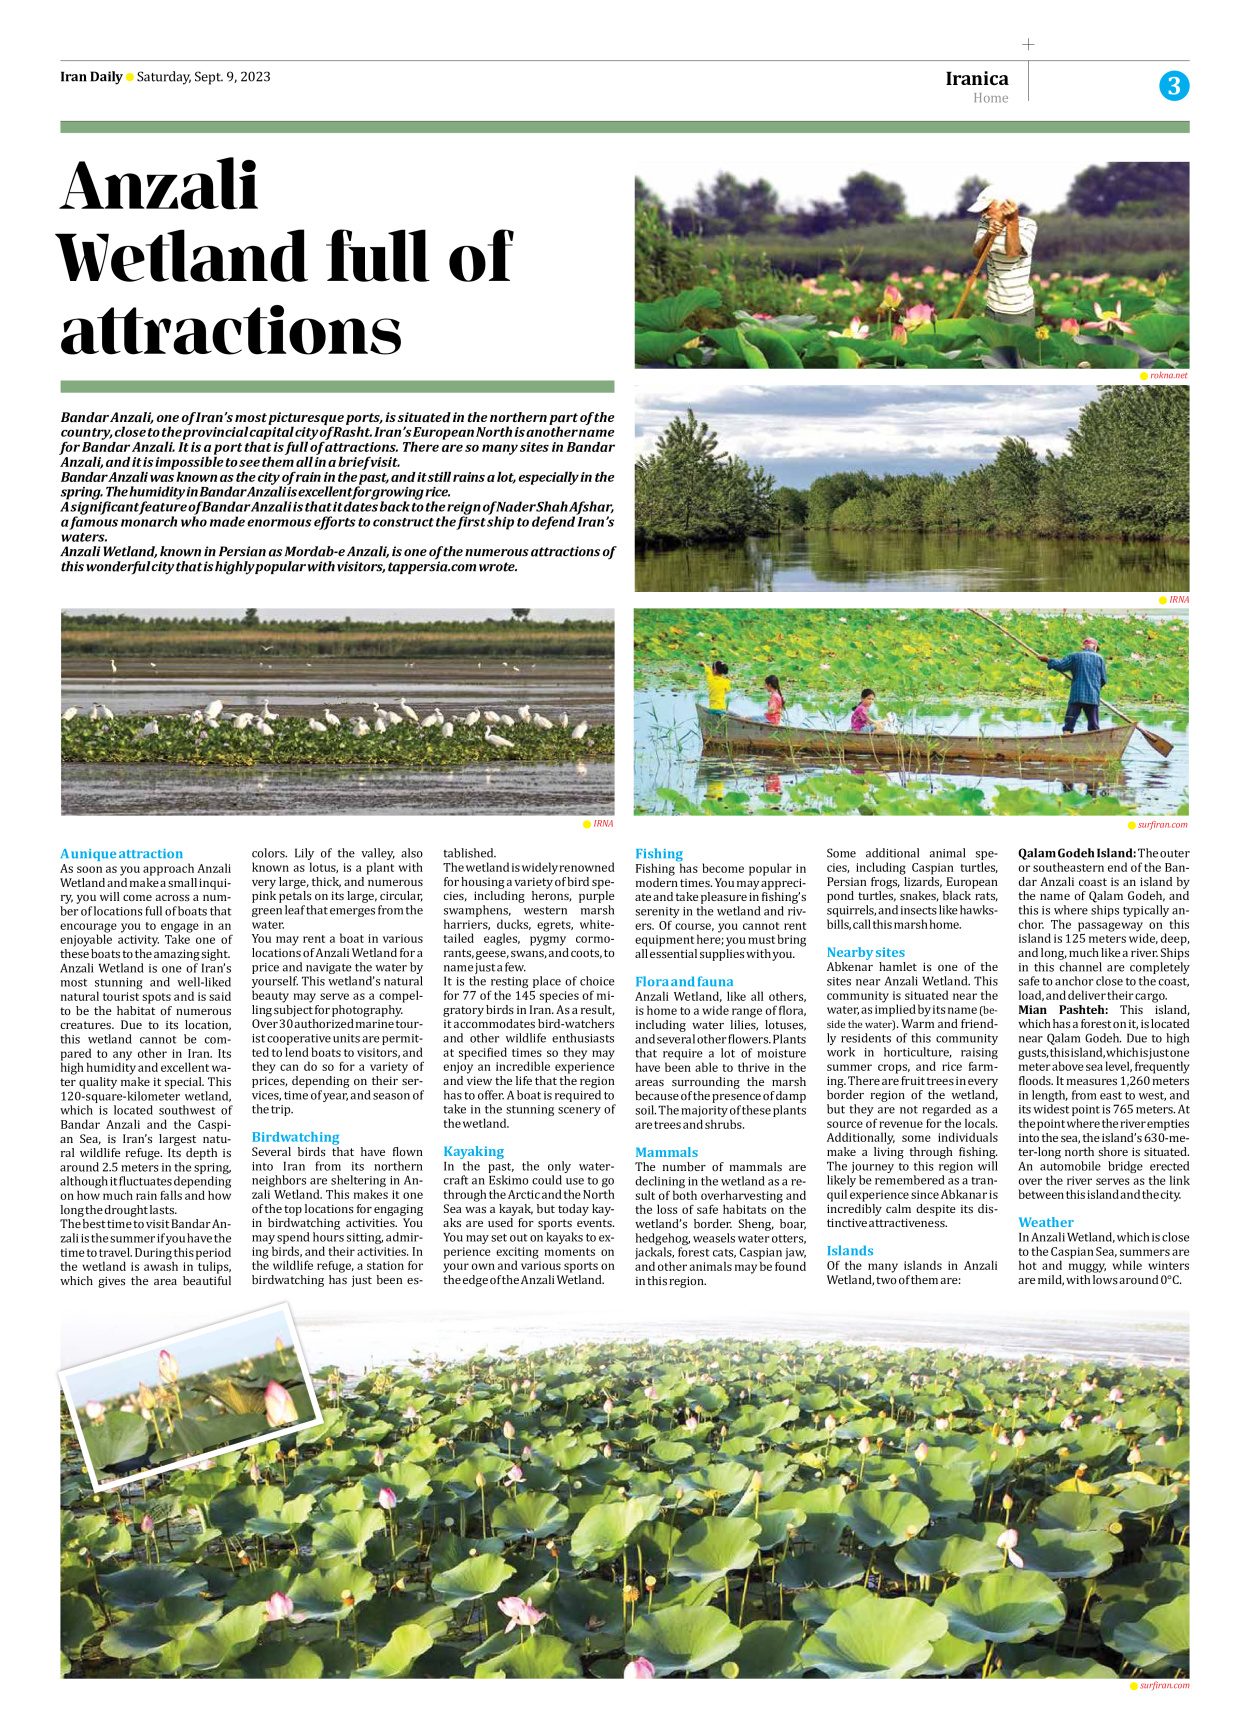 Iran Daily - Number Seven Thousand Three Hundred and Eighty Two - 09 September 2023 - Page 3